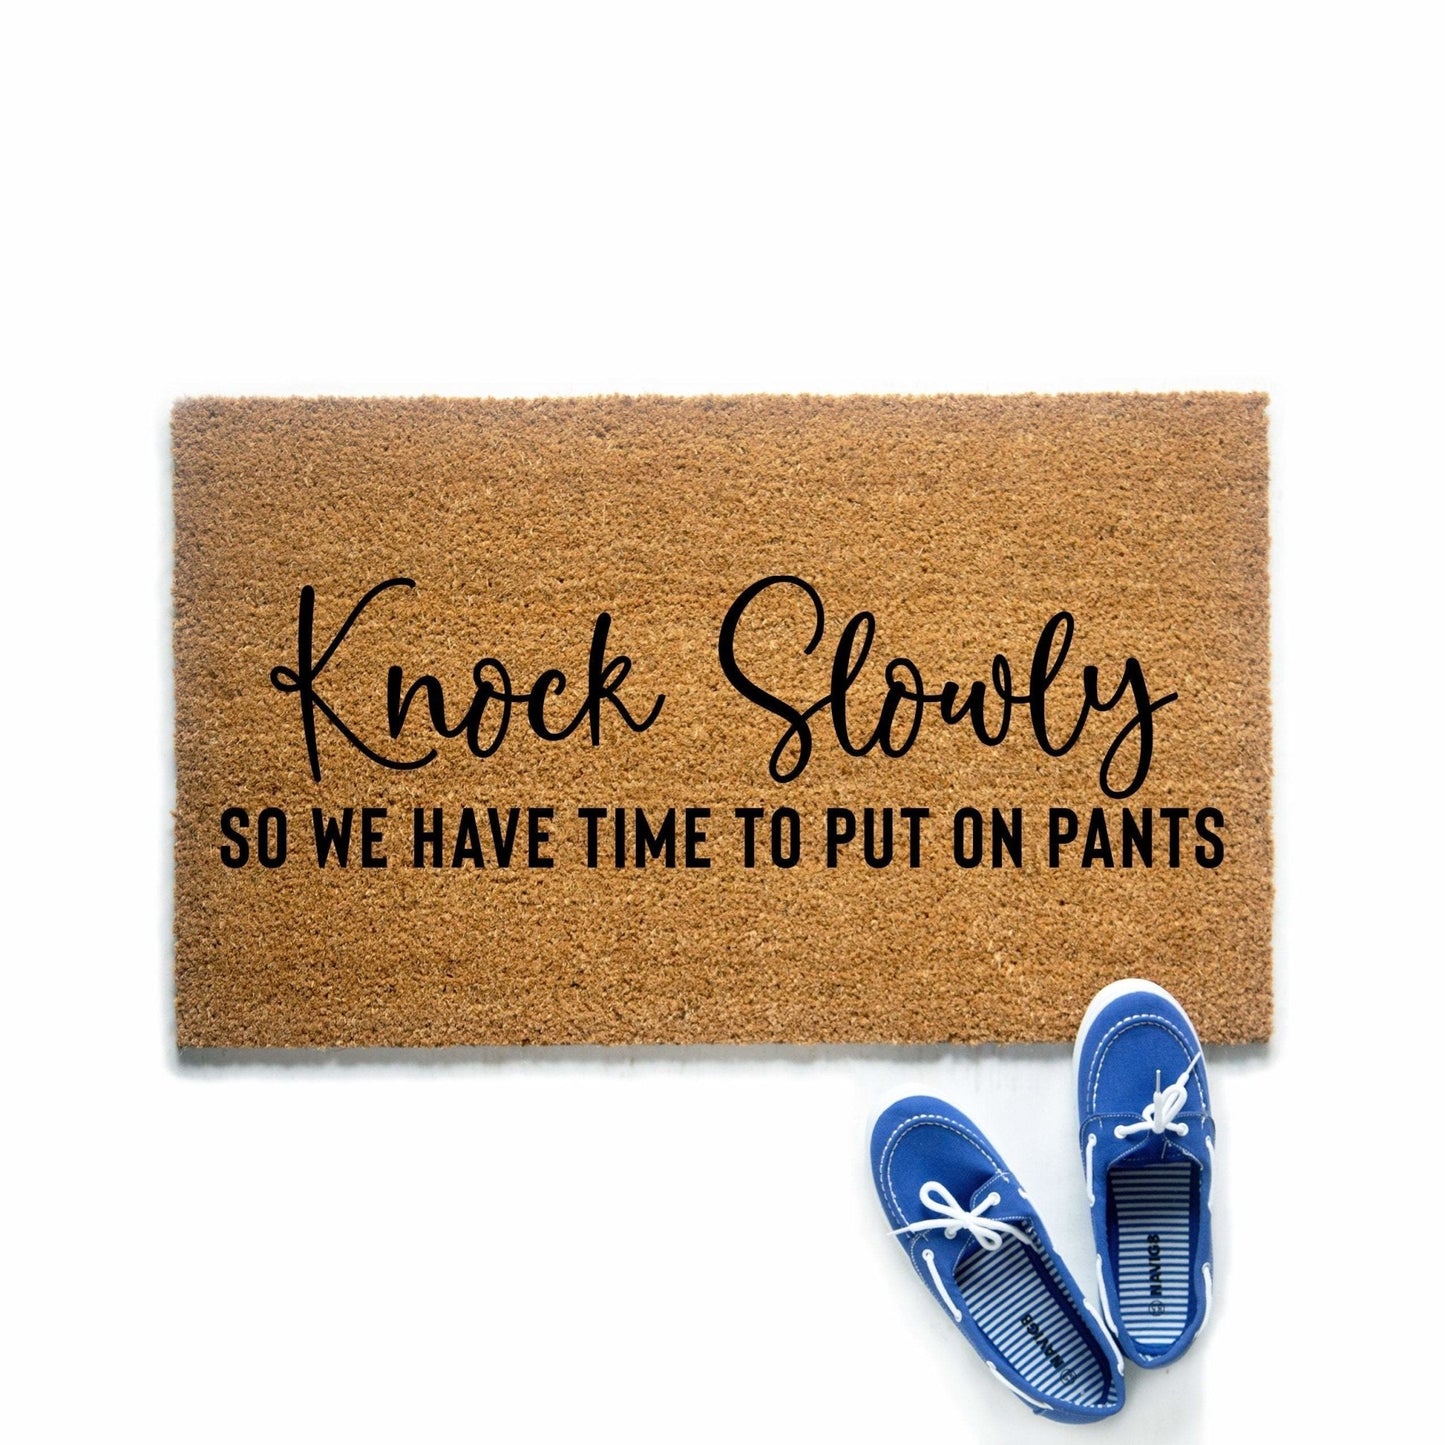 Knock Slowly So We Have Time To Put On Pants Doormat